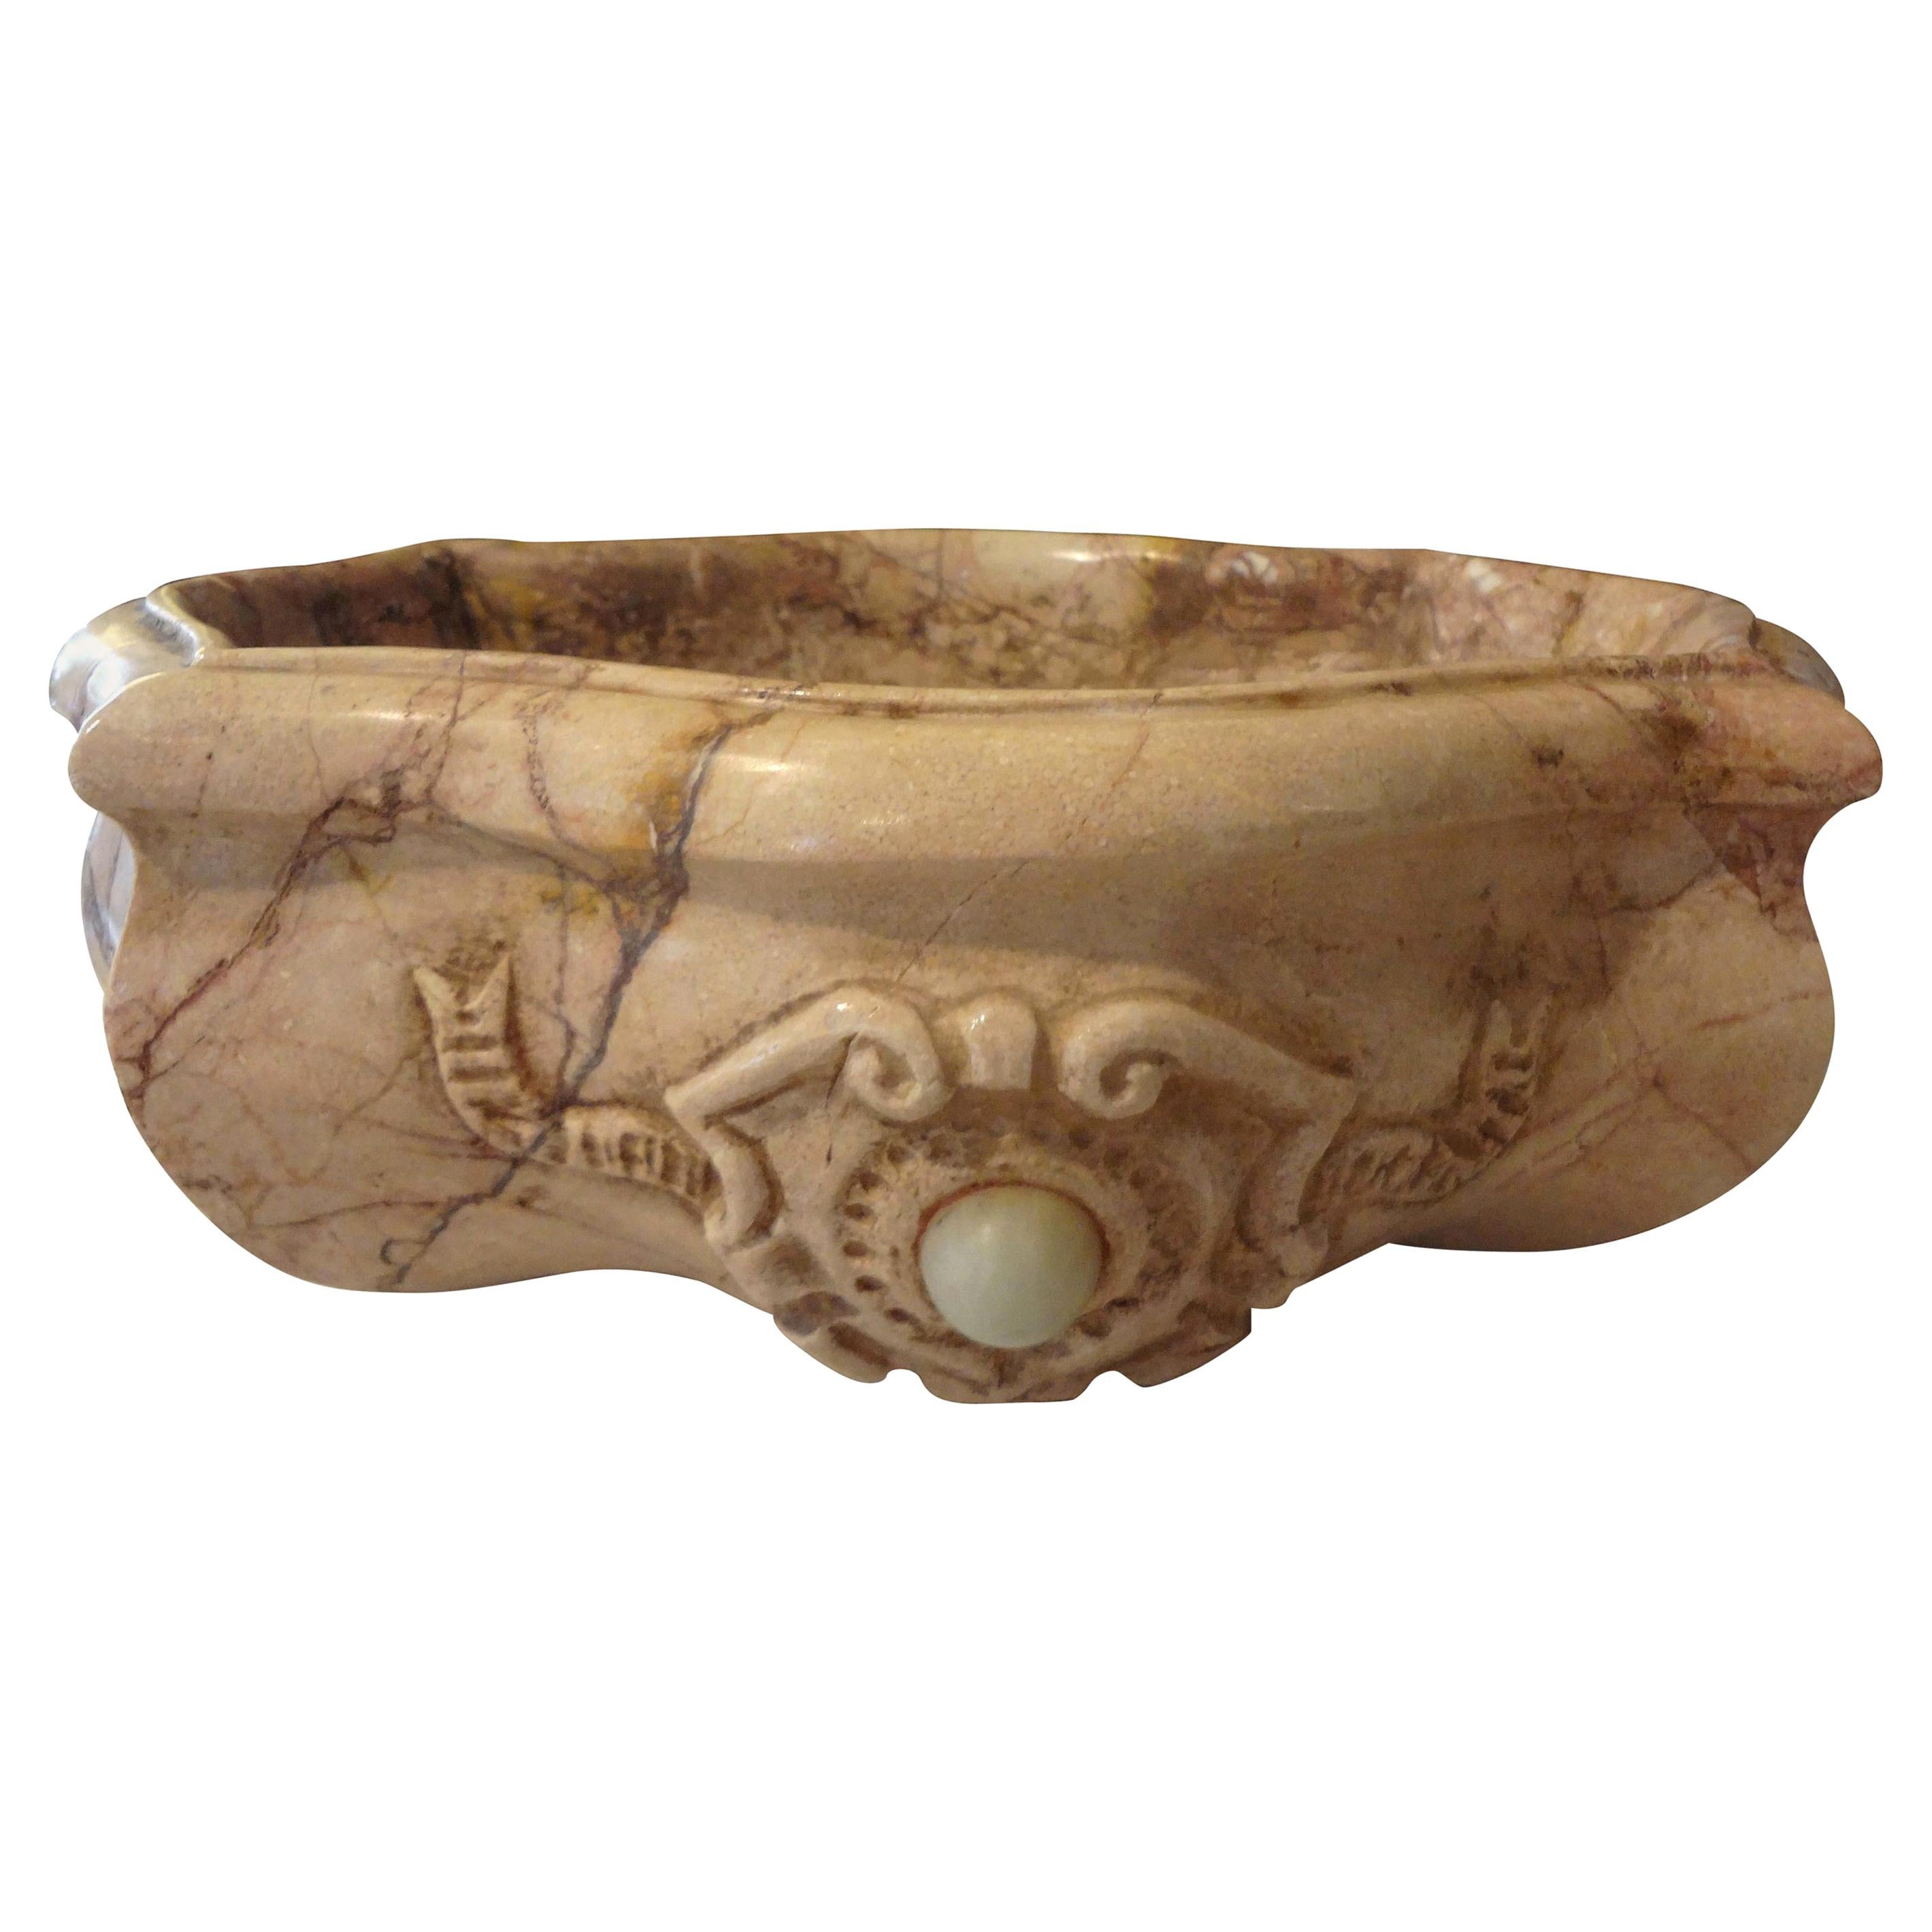 Late 18th-Early 19th Century Italian Marble Bowl